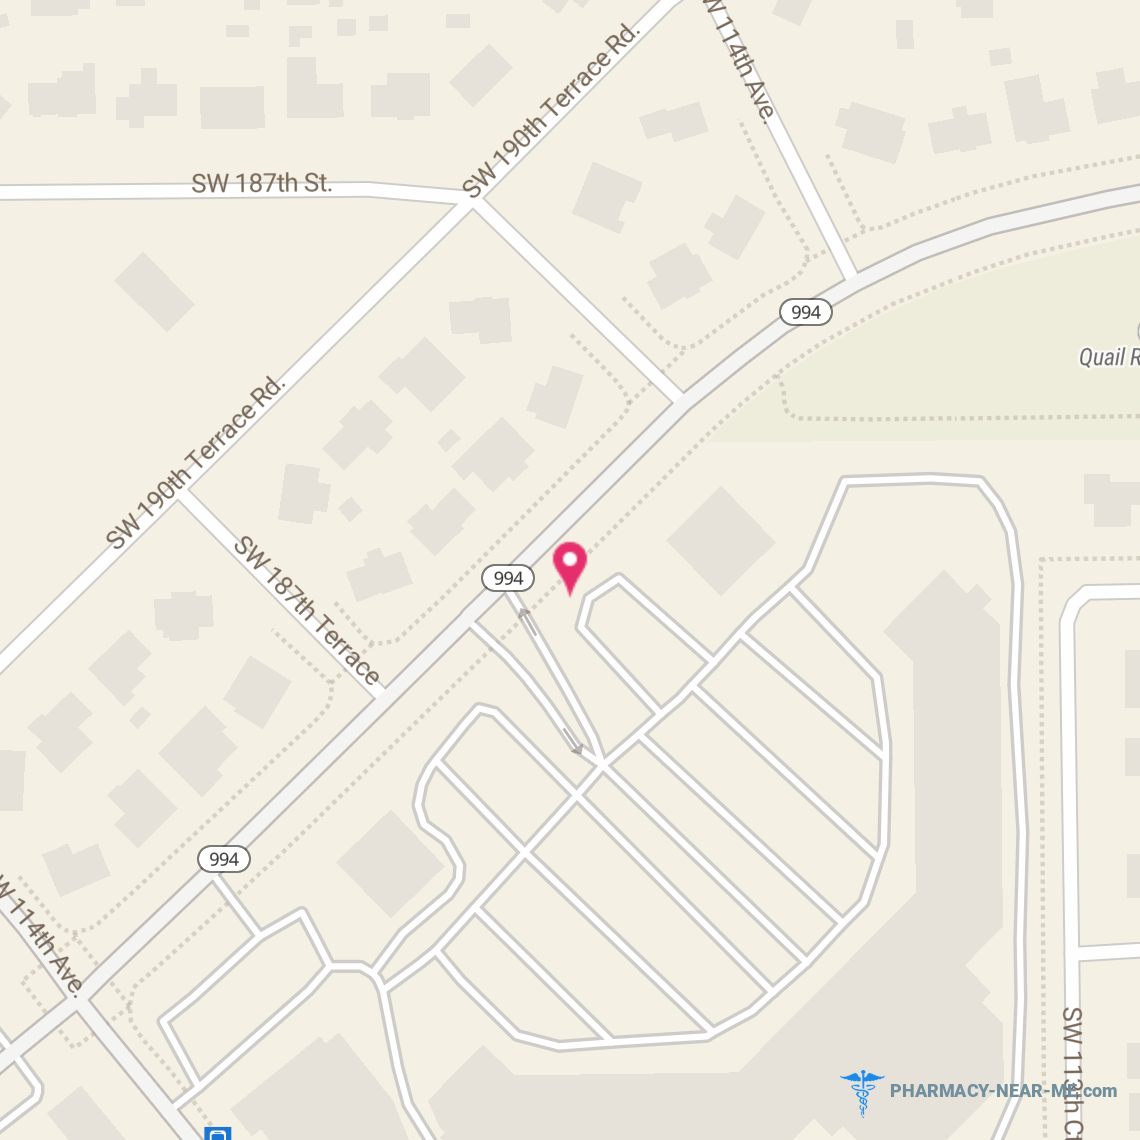 WALGREENS #02973 - Pharmacy Hours, Phone, Reviews & Information: 11398 Quail Roost Drive, Miami, Florida 33157, United States